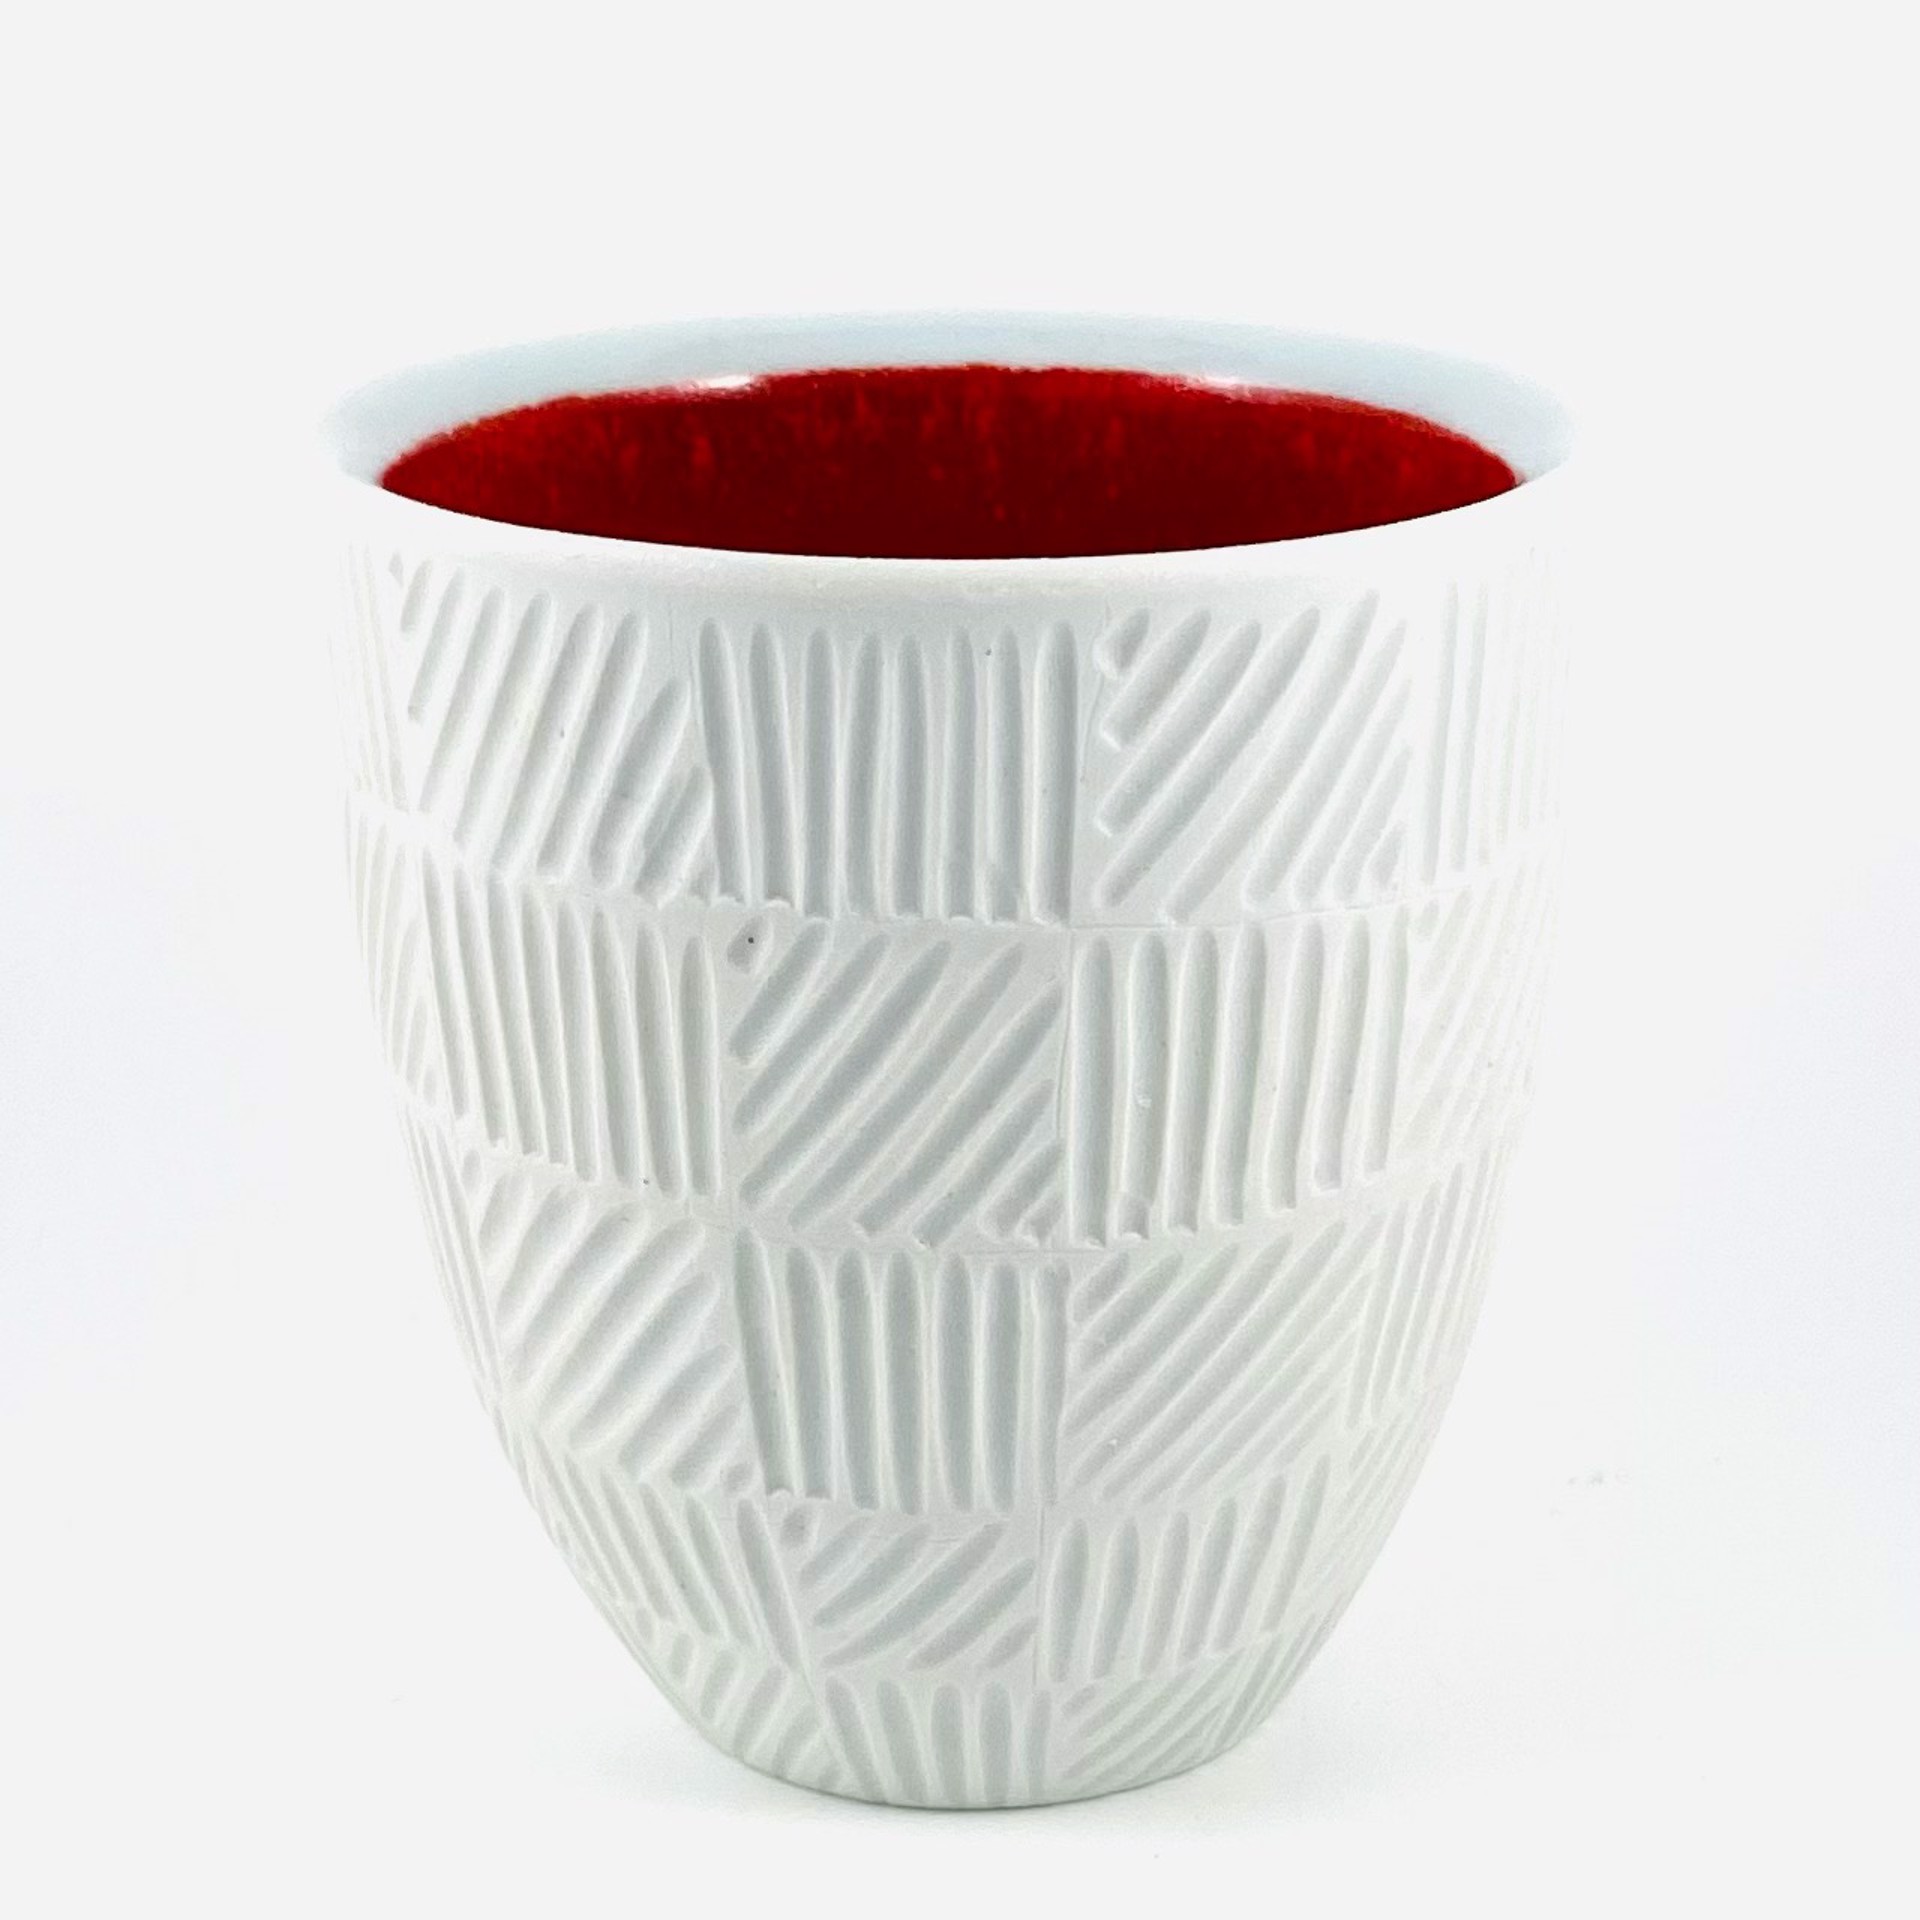 Textured Cup with Wine Red Glazed Interior AJ21-10 by Ann John